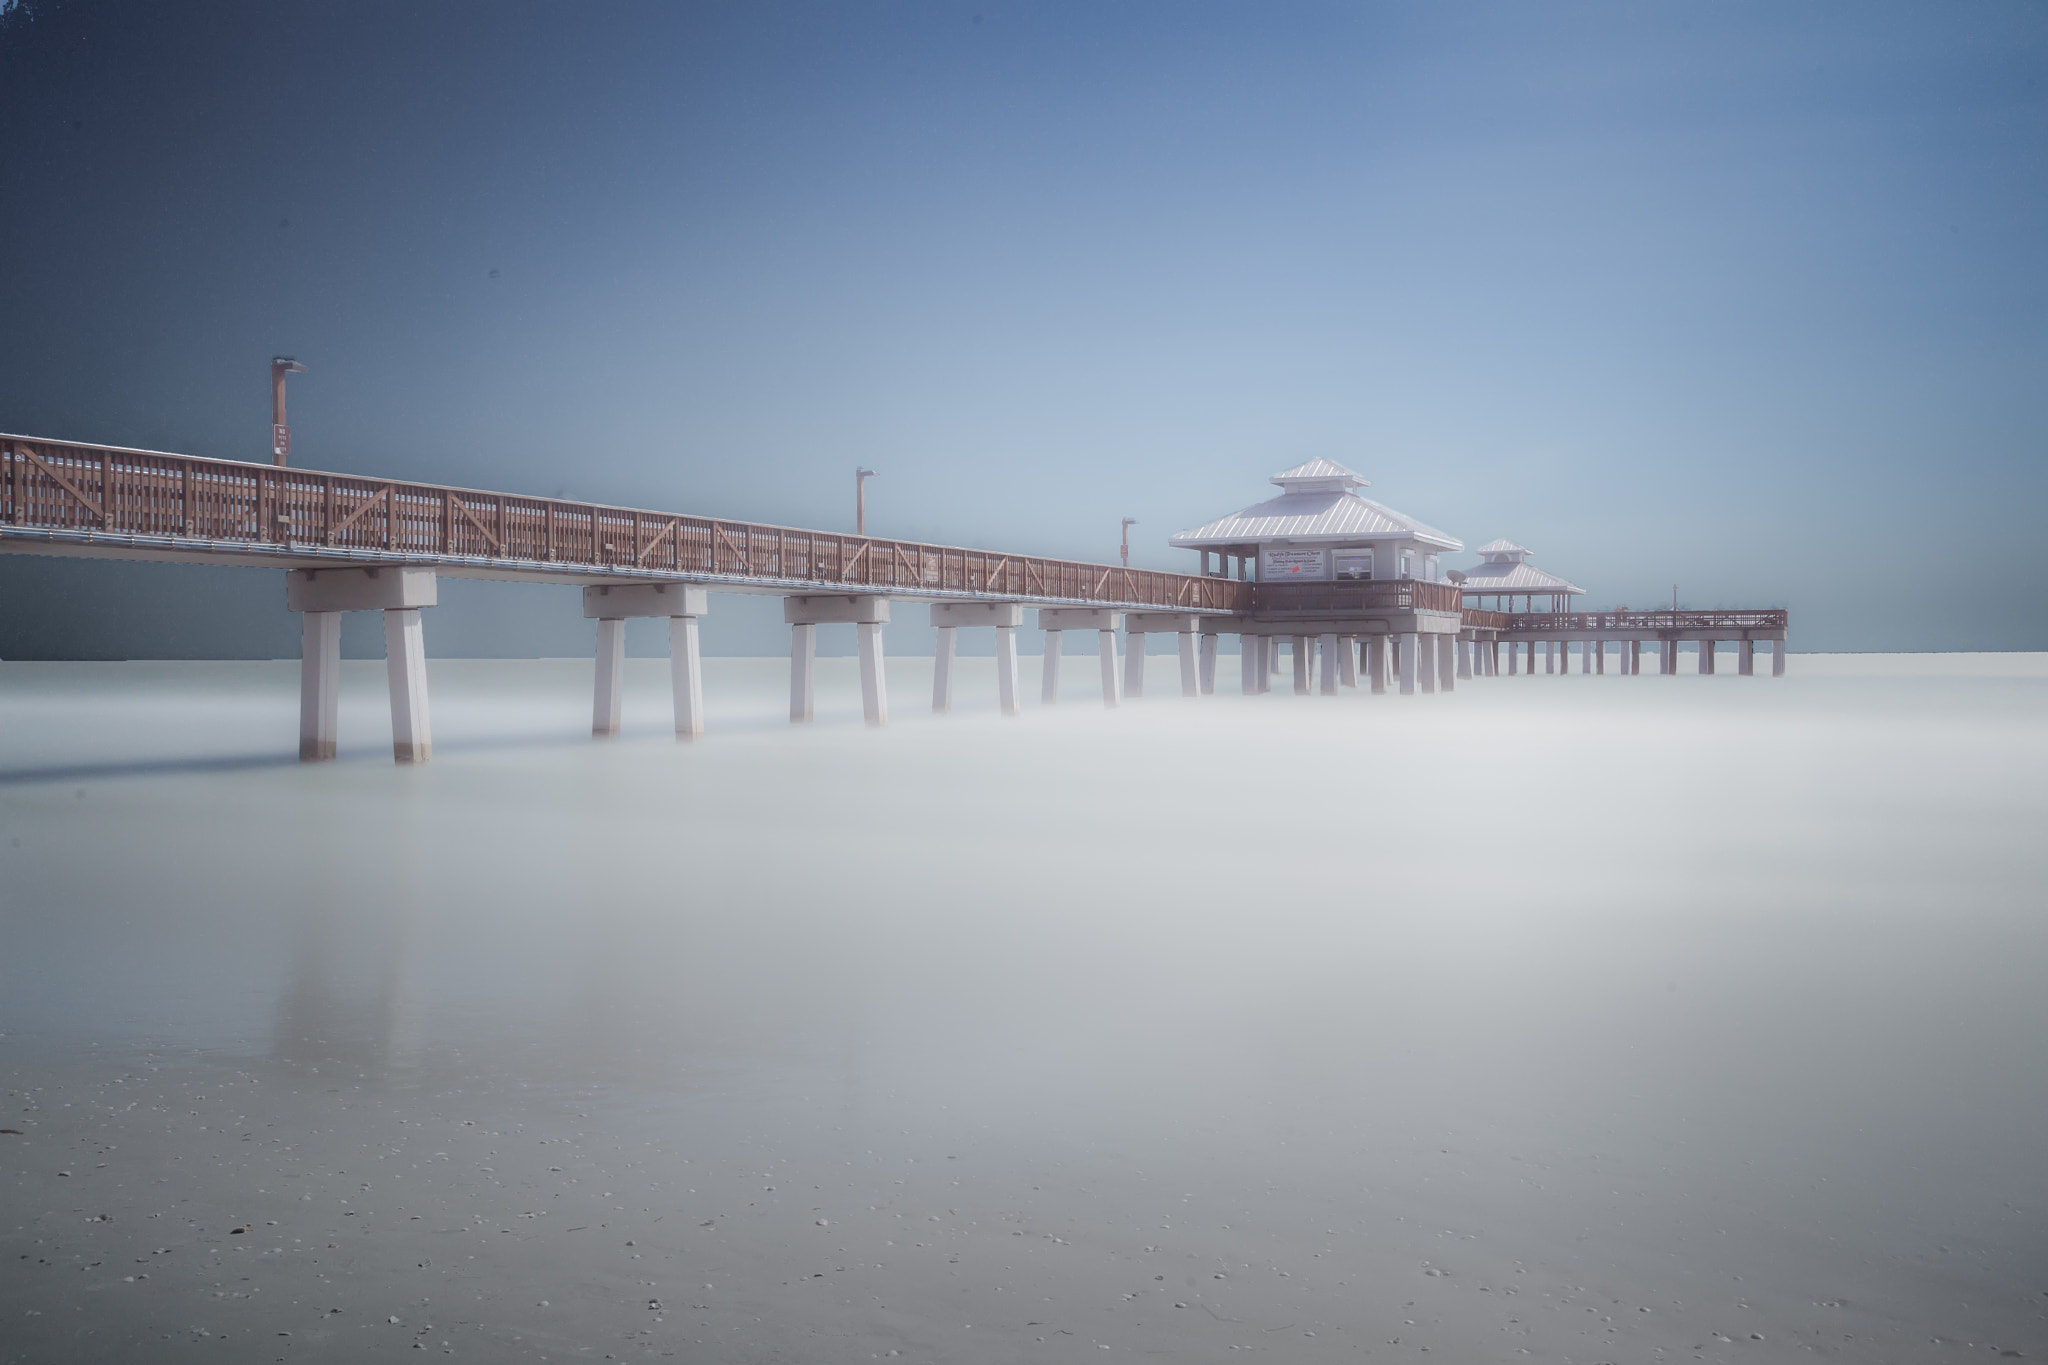 Canon EOS 5D Mark II + Sigma 24-105mm f/4 DG OS HSM | A sample photo. Dreamscape at ft. myers beach photography